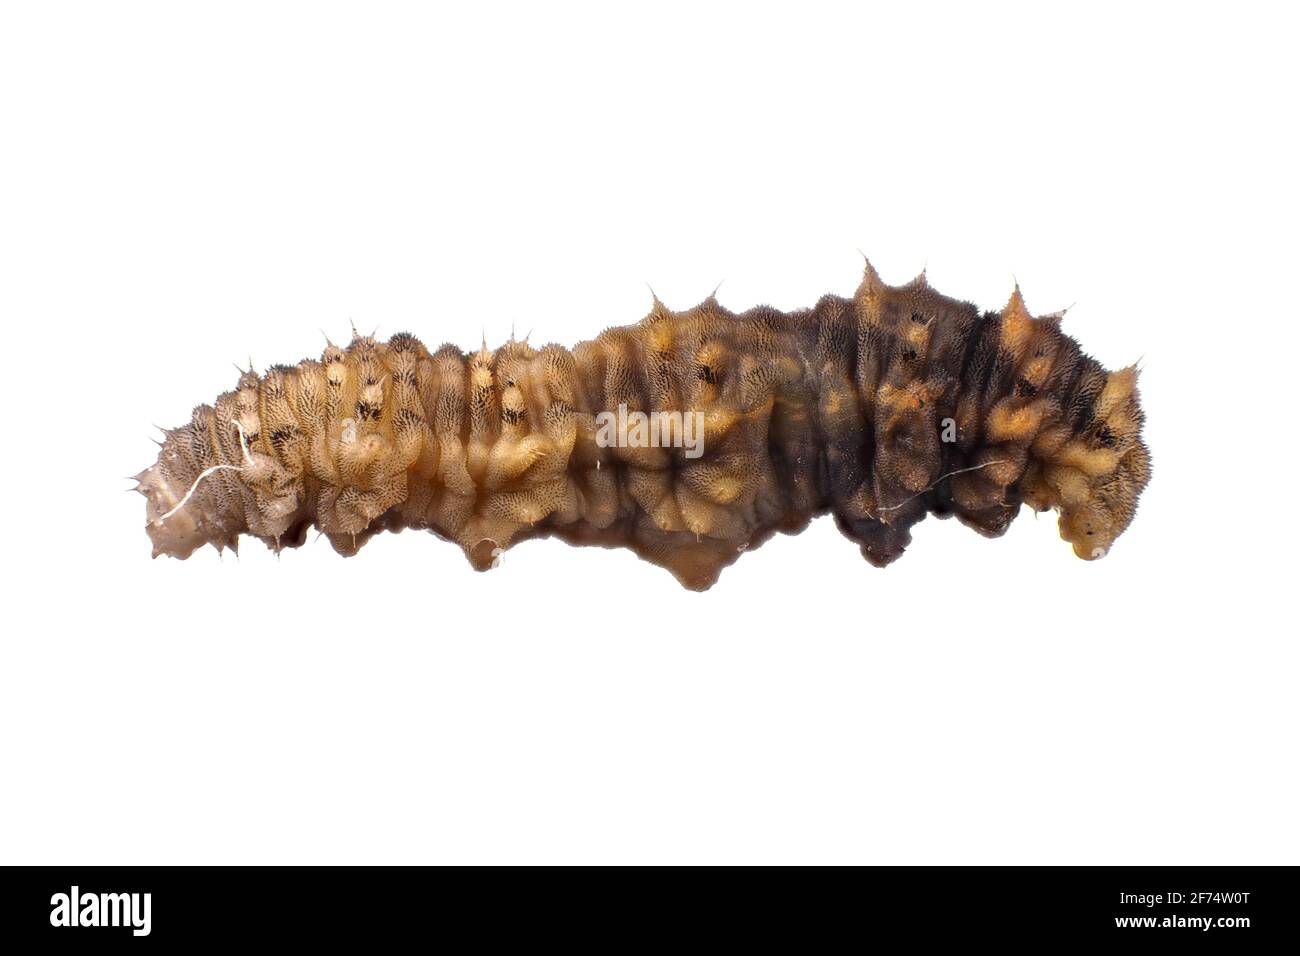 Small potato pest larva (cutworm), about 7mm in length Stock Photo